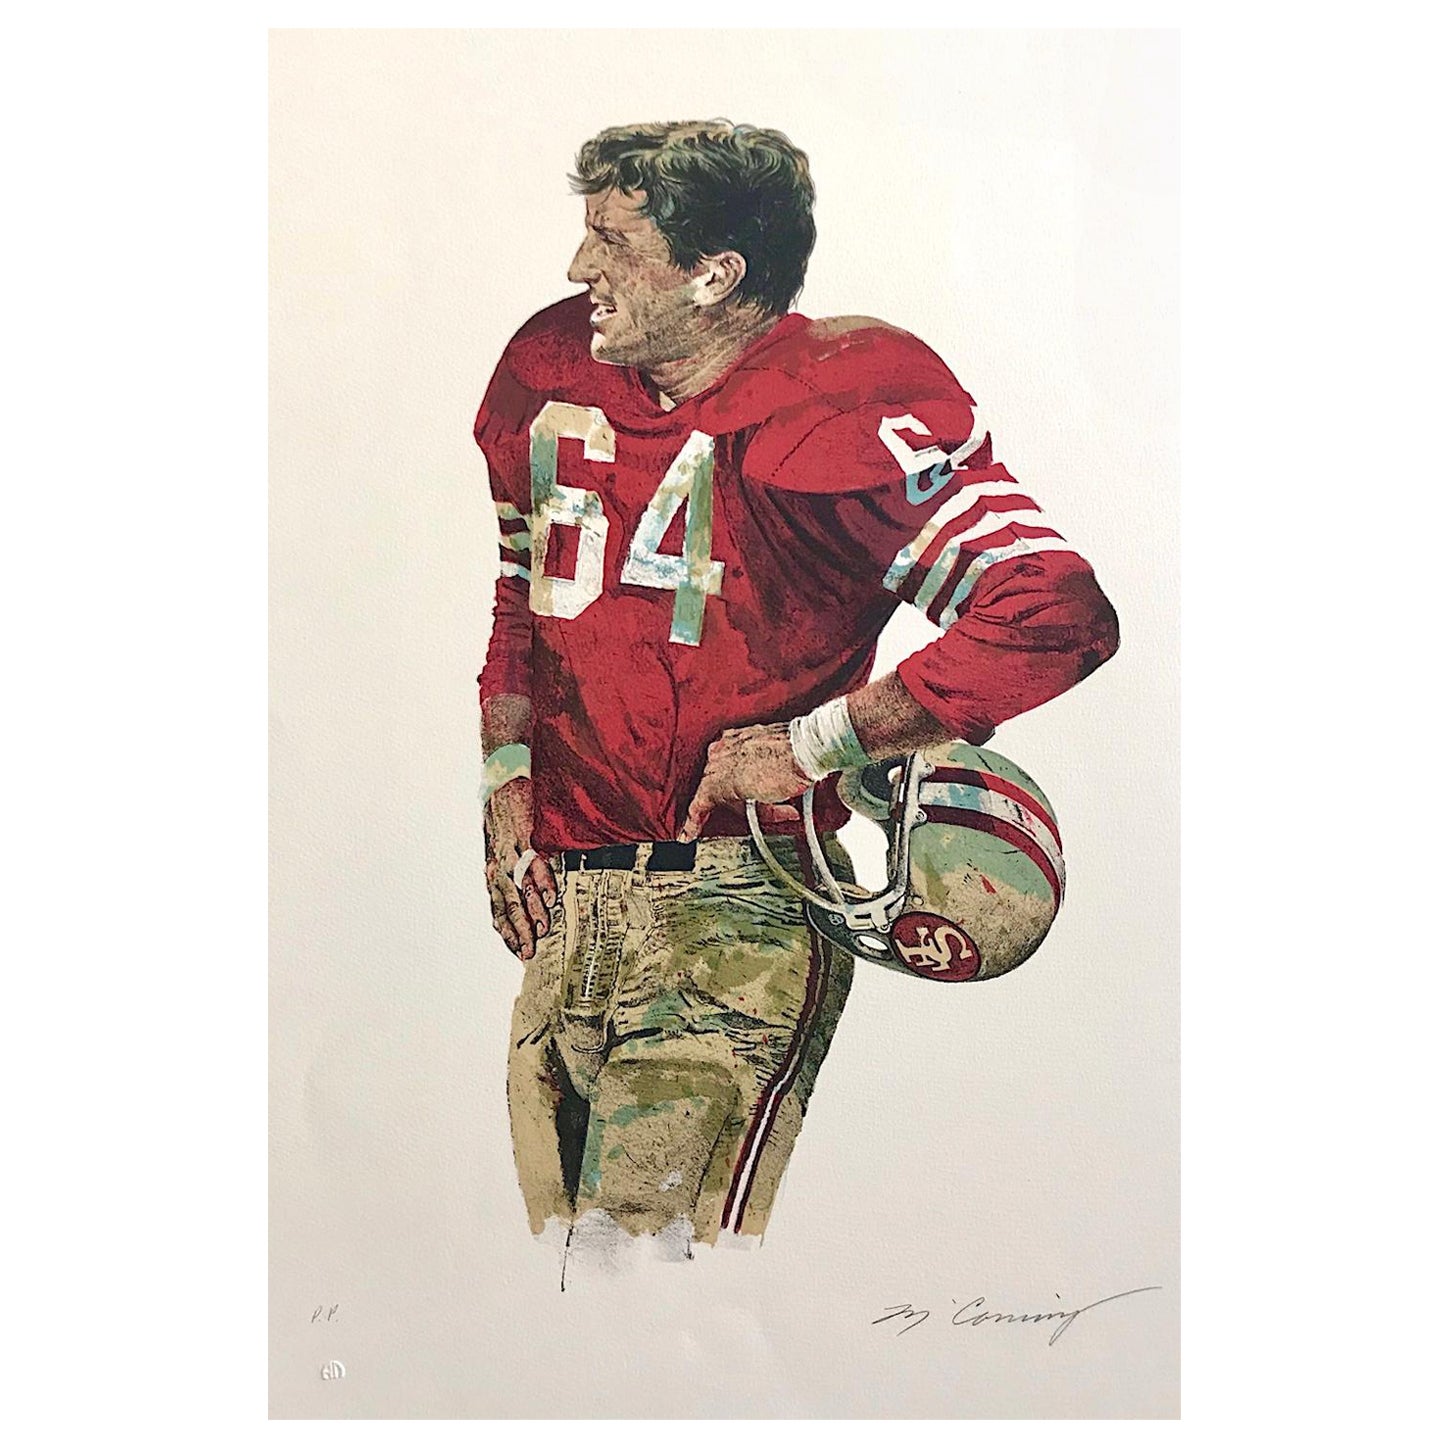 OLD PRO Dave Wilcox San Francisco 49ers NFL Football History, Signed Lithograph